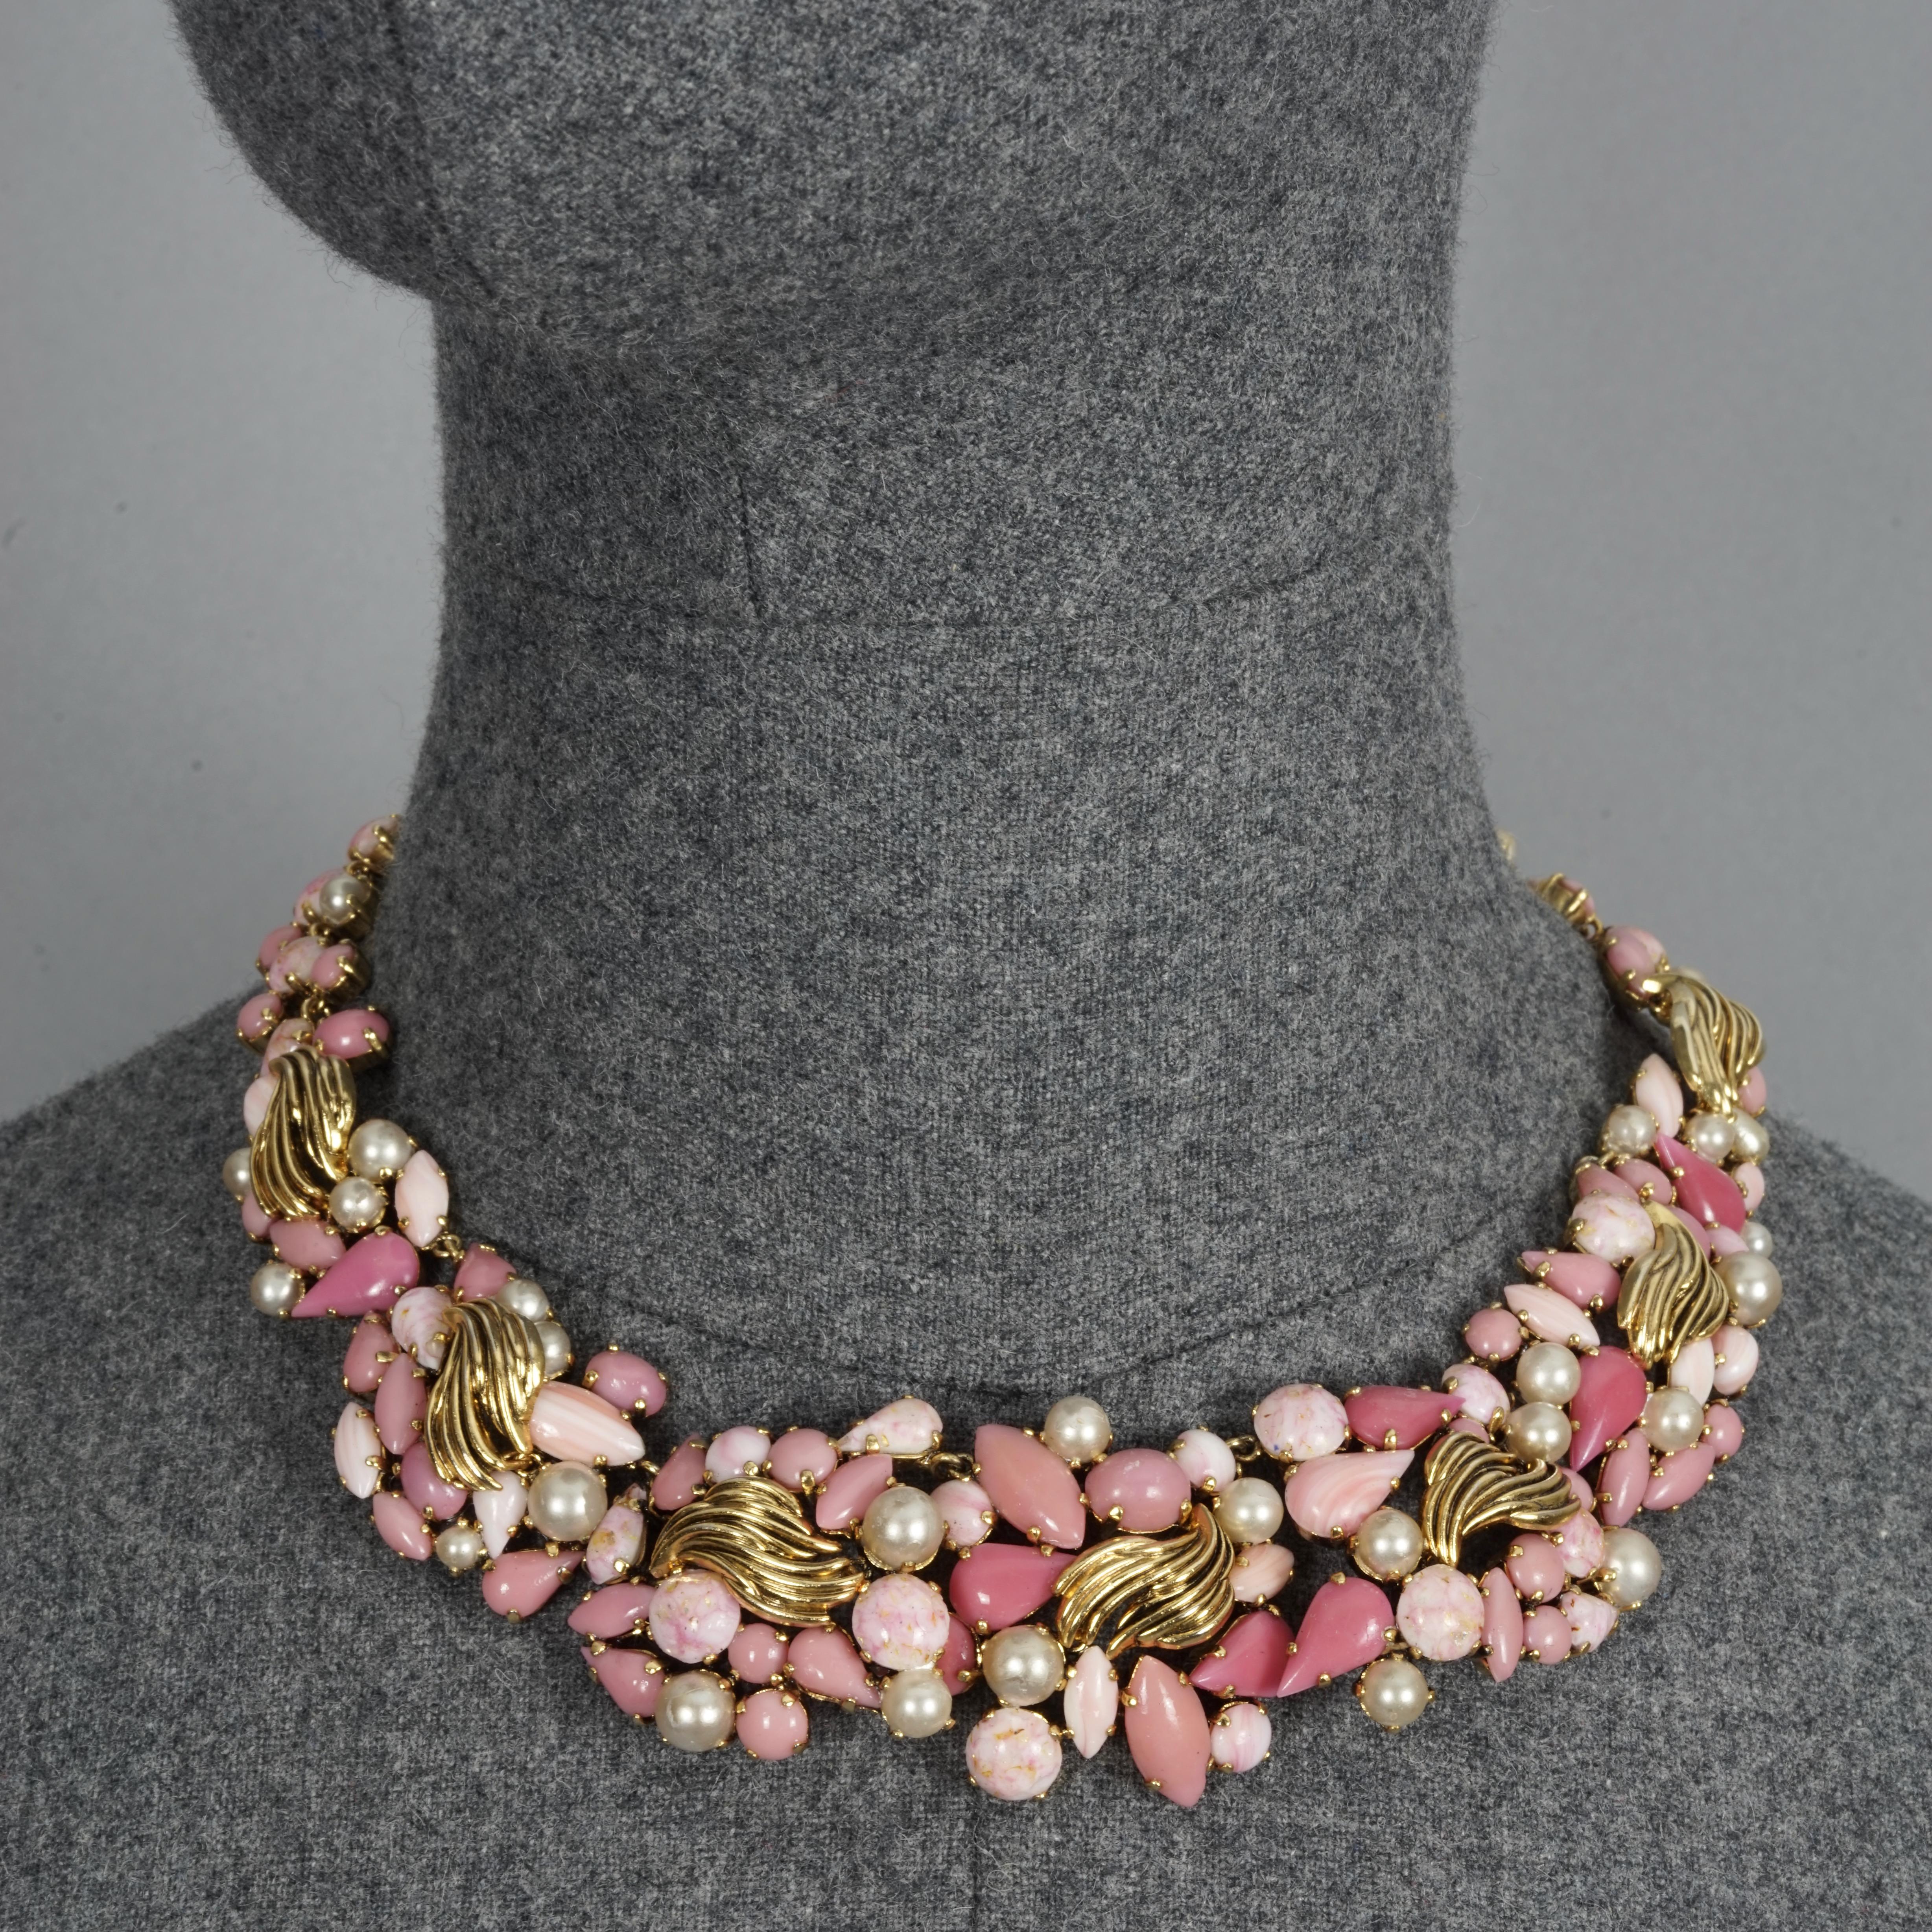 Vintage 1964 CHRISTIAN DIOR Elaborate Jeweled Pearl Cabochon Necklace

Measurements:
Height: 1.46 inches (3.7 cm)
Wearable Length: 13.78 inches (35 cm)

Features:
- 100% authentic CHRISTIAN DIOR.
- Jeweled choker necklace in pink cabochons and